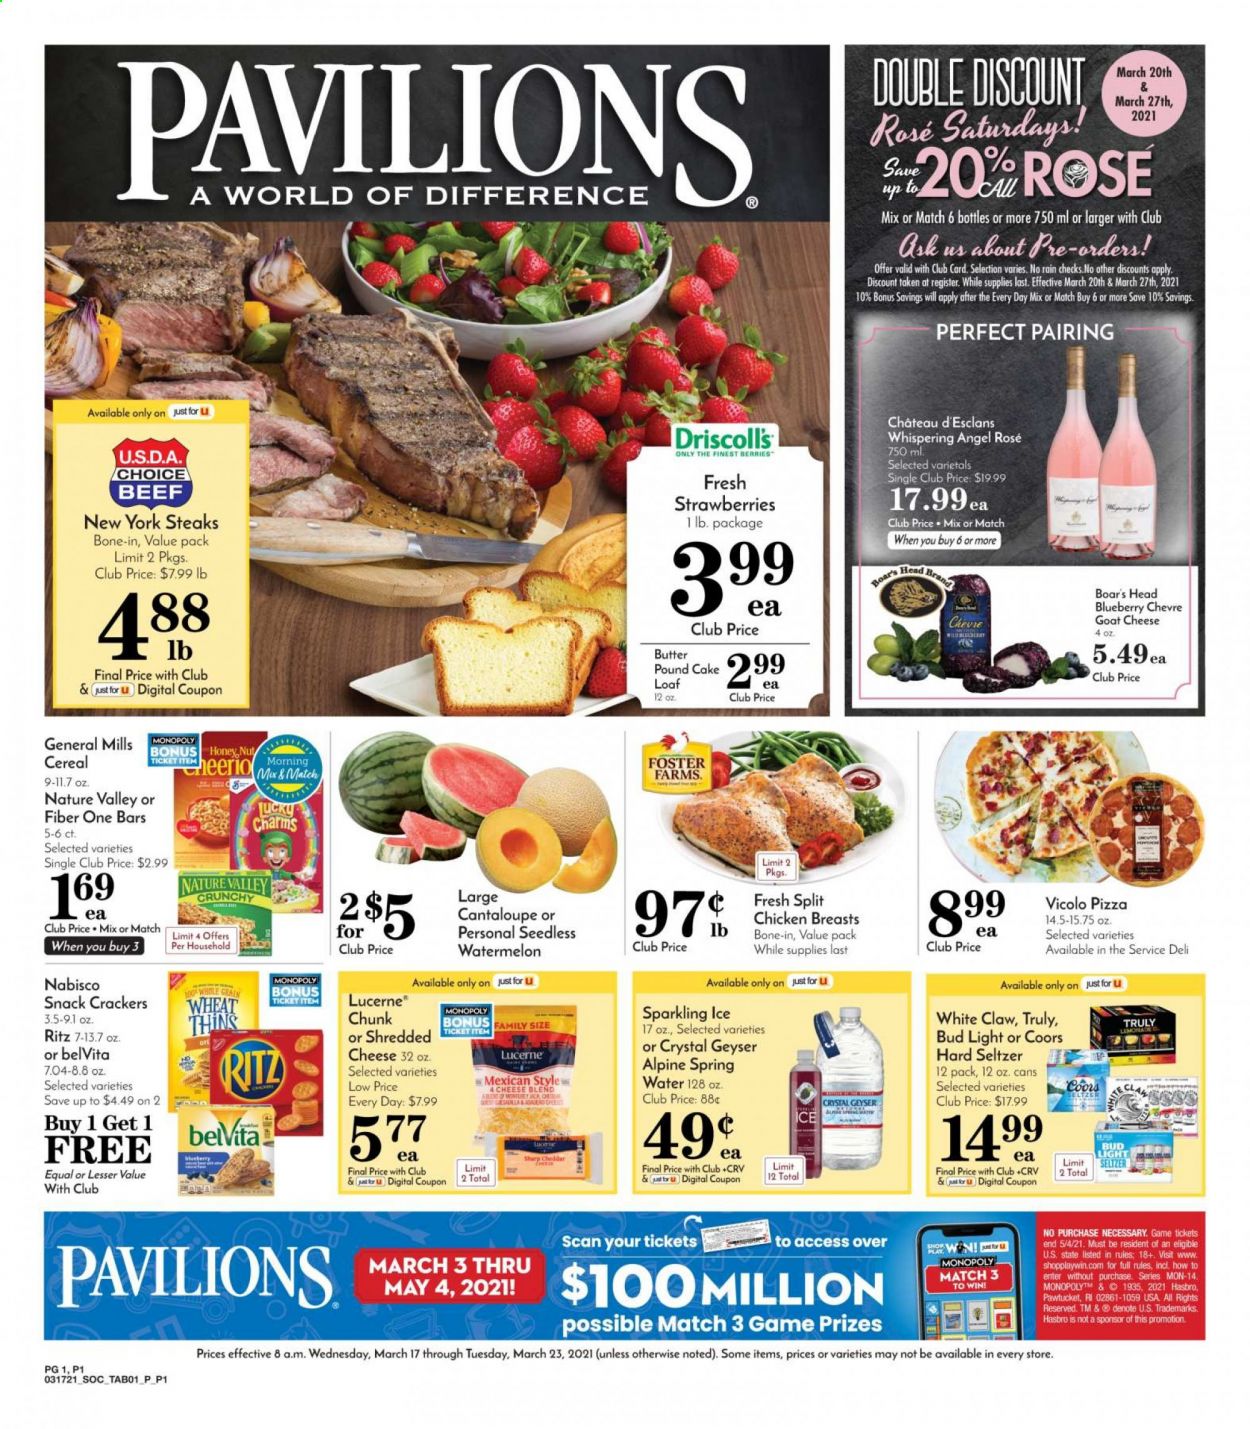 thumbnail - Pavilions Flyer - 03/17/2021 - 03/23/2021 - Sales products - Coors, cantaloupe, cake, pound cake, pizza, goat cheese, shredded cheese, cheddar, butter, strawberries, crackers, RITZ, snack, Thins, cereals, belVita, Nature Valley, Fiber One, lemonade, seltzer water, spring water, White Claw, Hard Seltzer, TRULY, beer, Bud Light, chicken breasts, steak, Monopoly, Hasbro, rose, watermelon. Page 1.